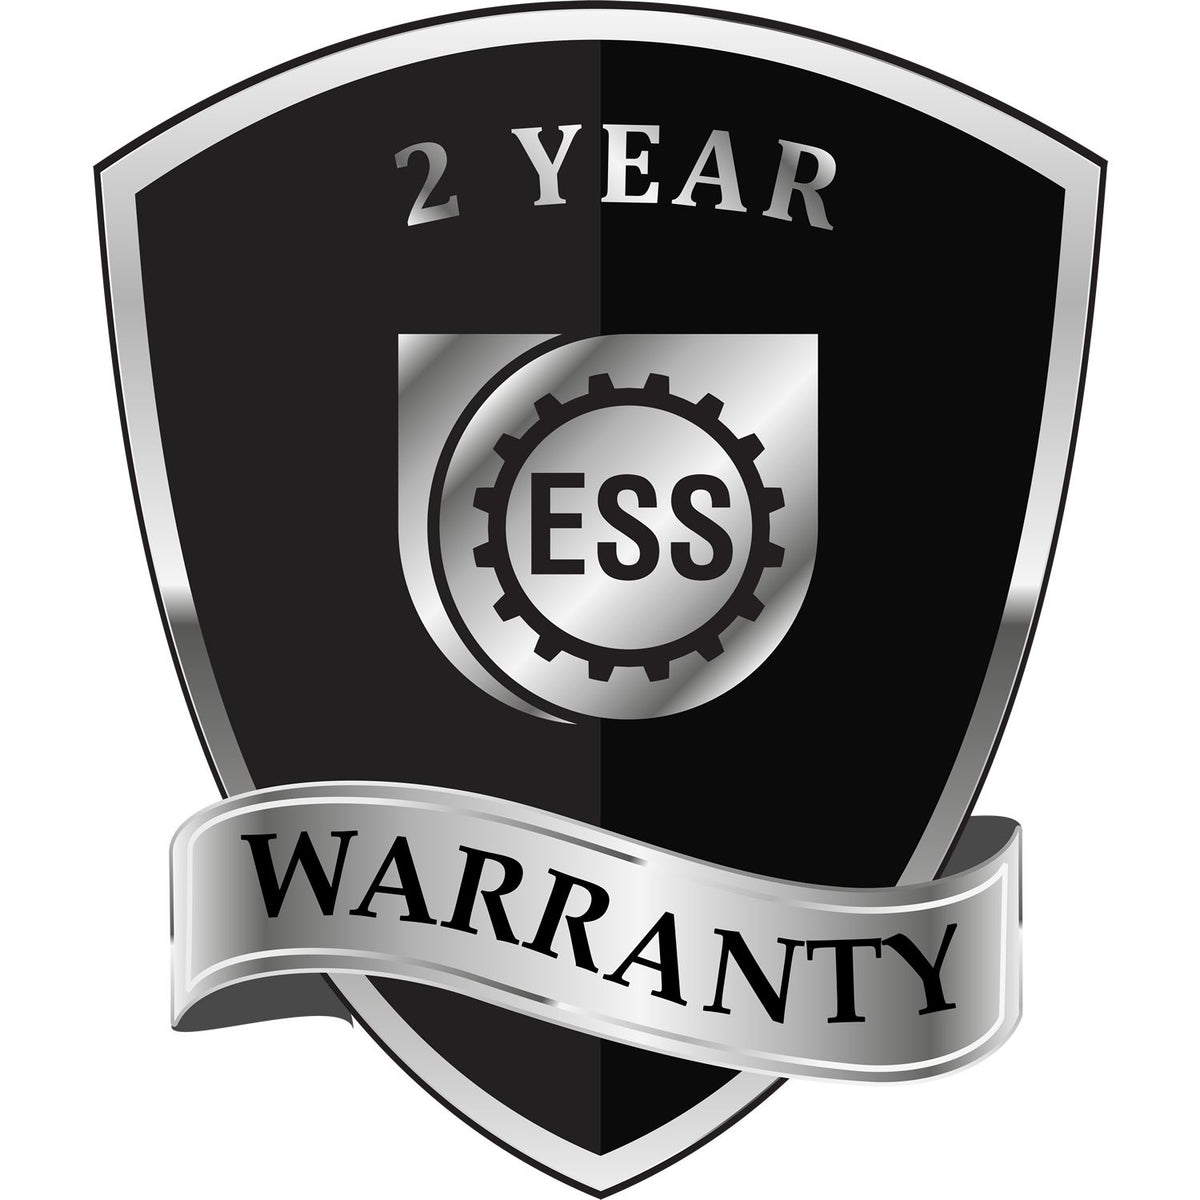 A black and silver badge or emblem showing warranty information for the Gift North Dakota Engineer Seal